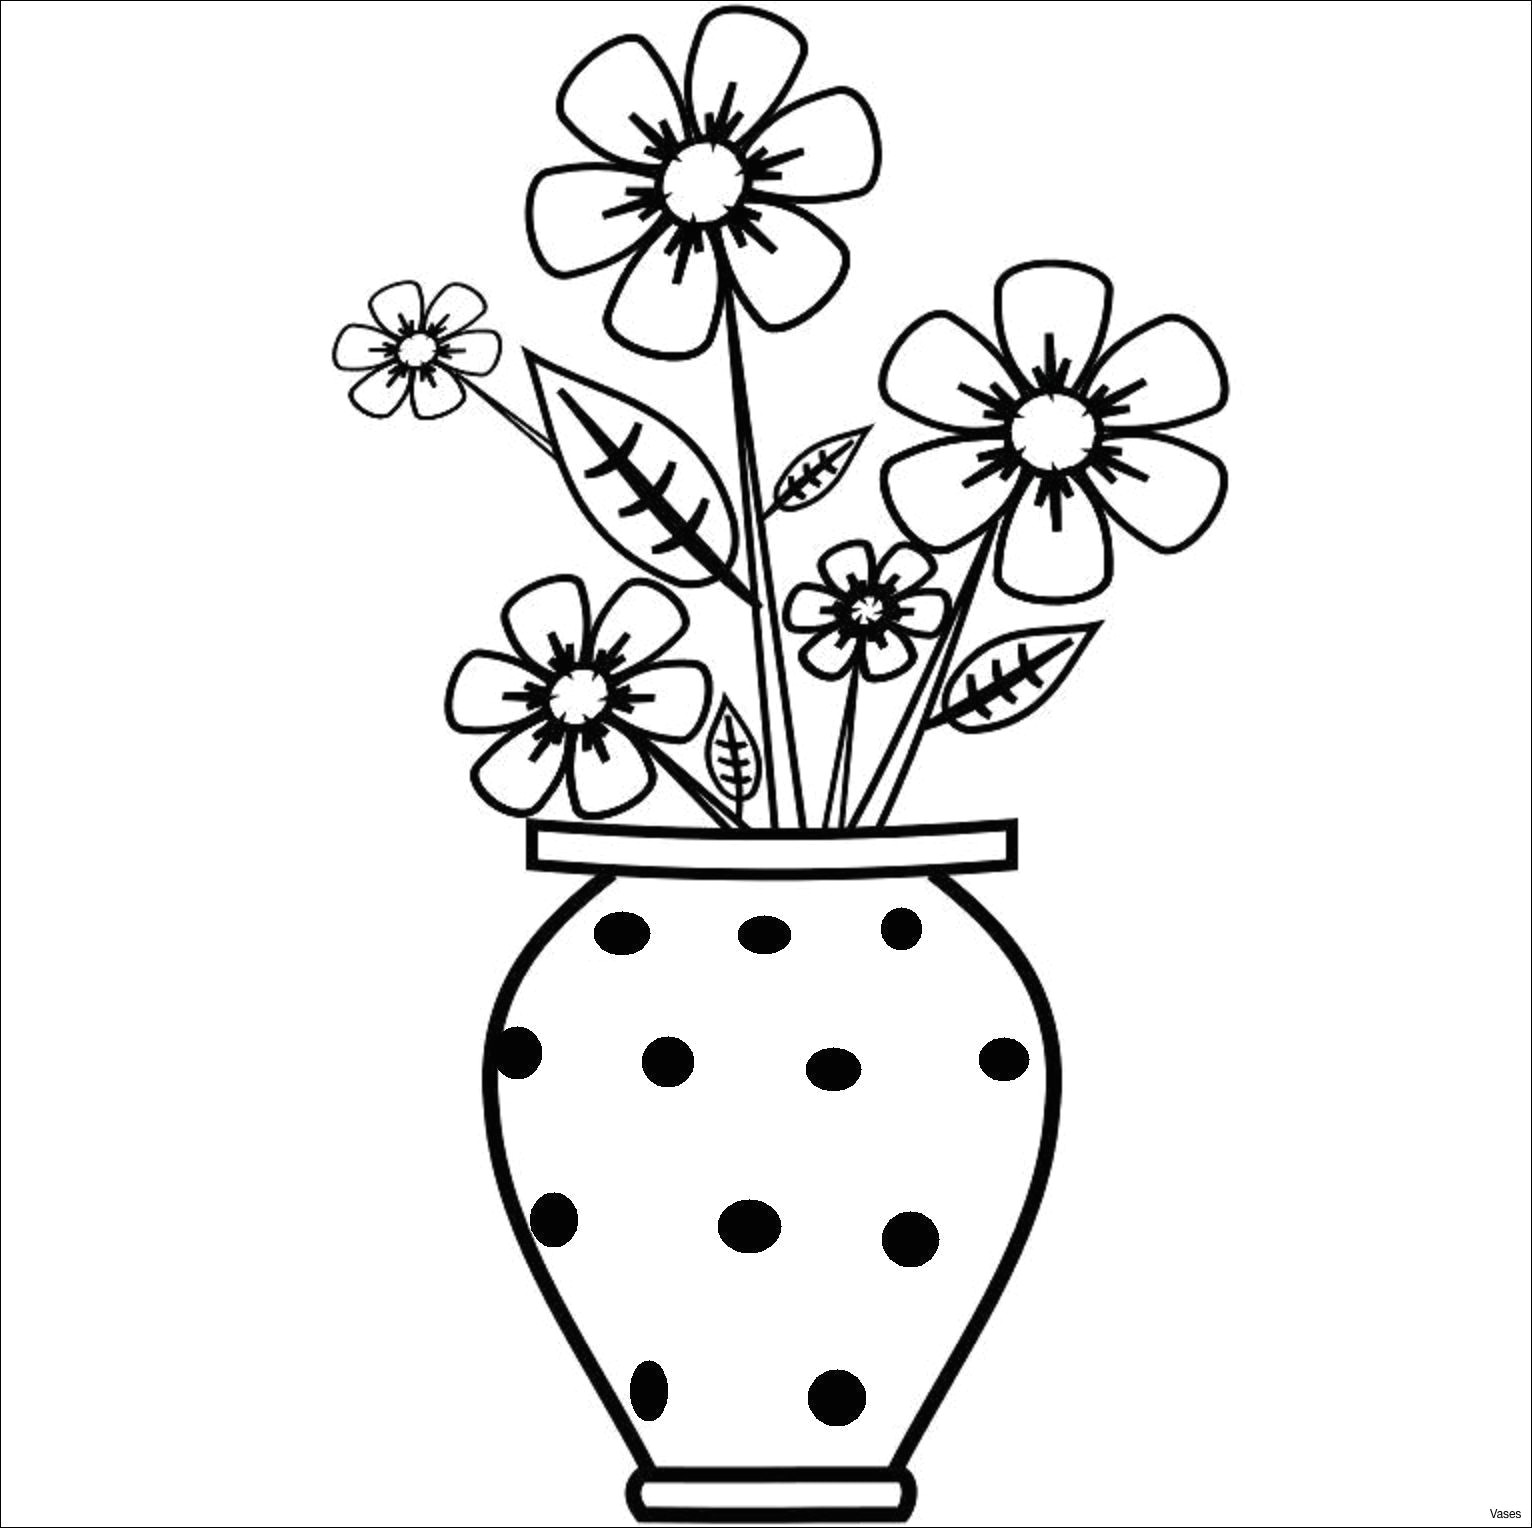 Fun 2 Draw Easy Drawings Images Of Easy Drawings Vase Art Drawings How to Draw A Vase Step 2h